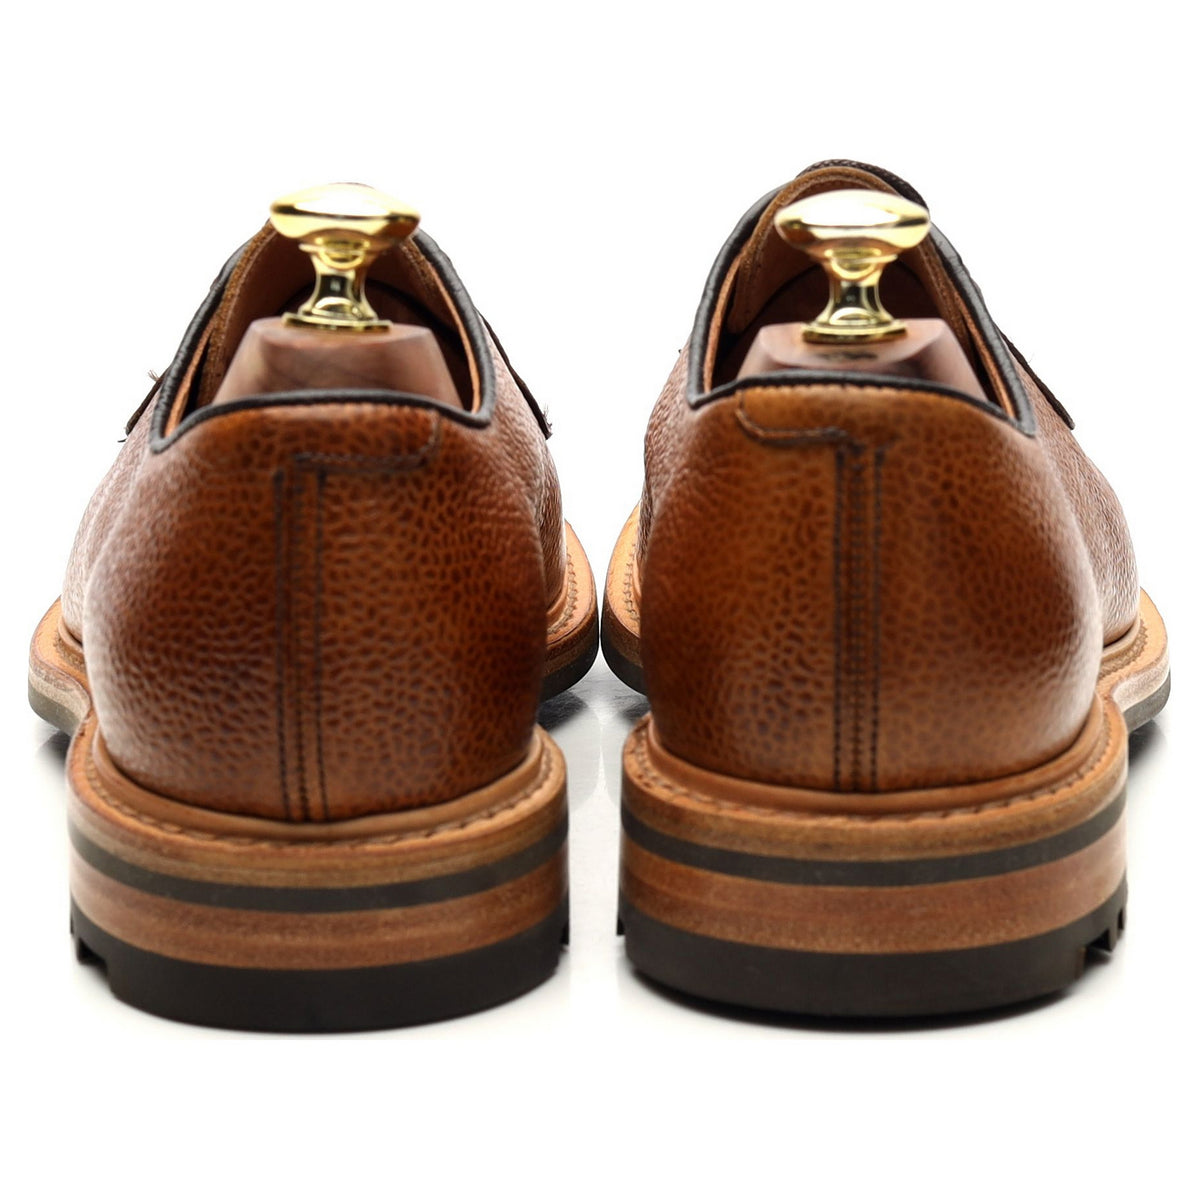 &#39;Teign ll&#39; Tan Brown Leather Derby UK 7.5 F